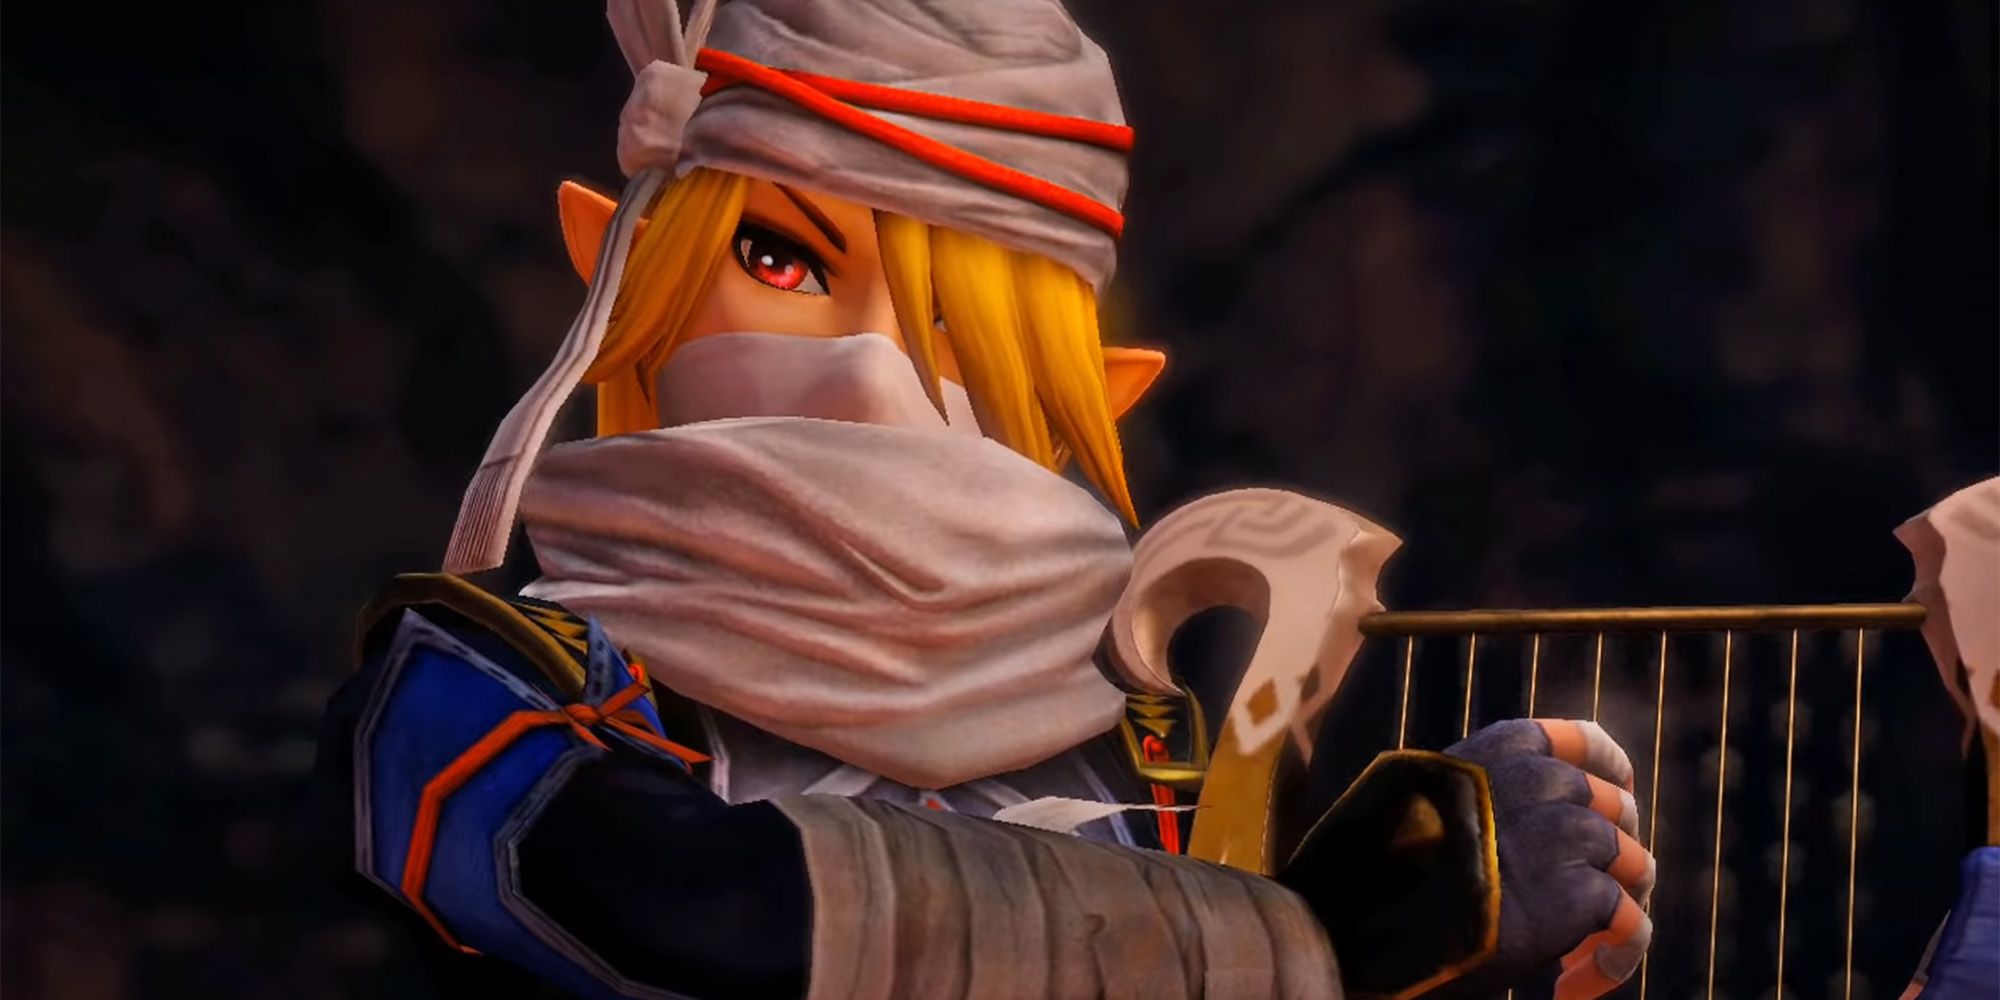 Hyrule Warriors - Shiek playing the lyre